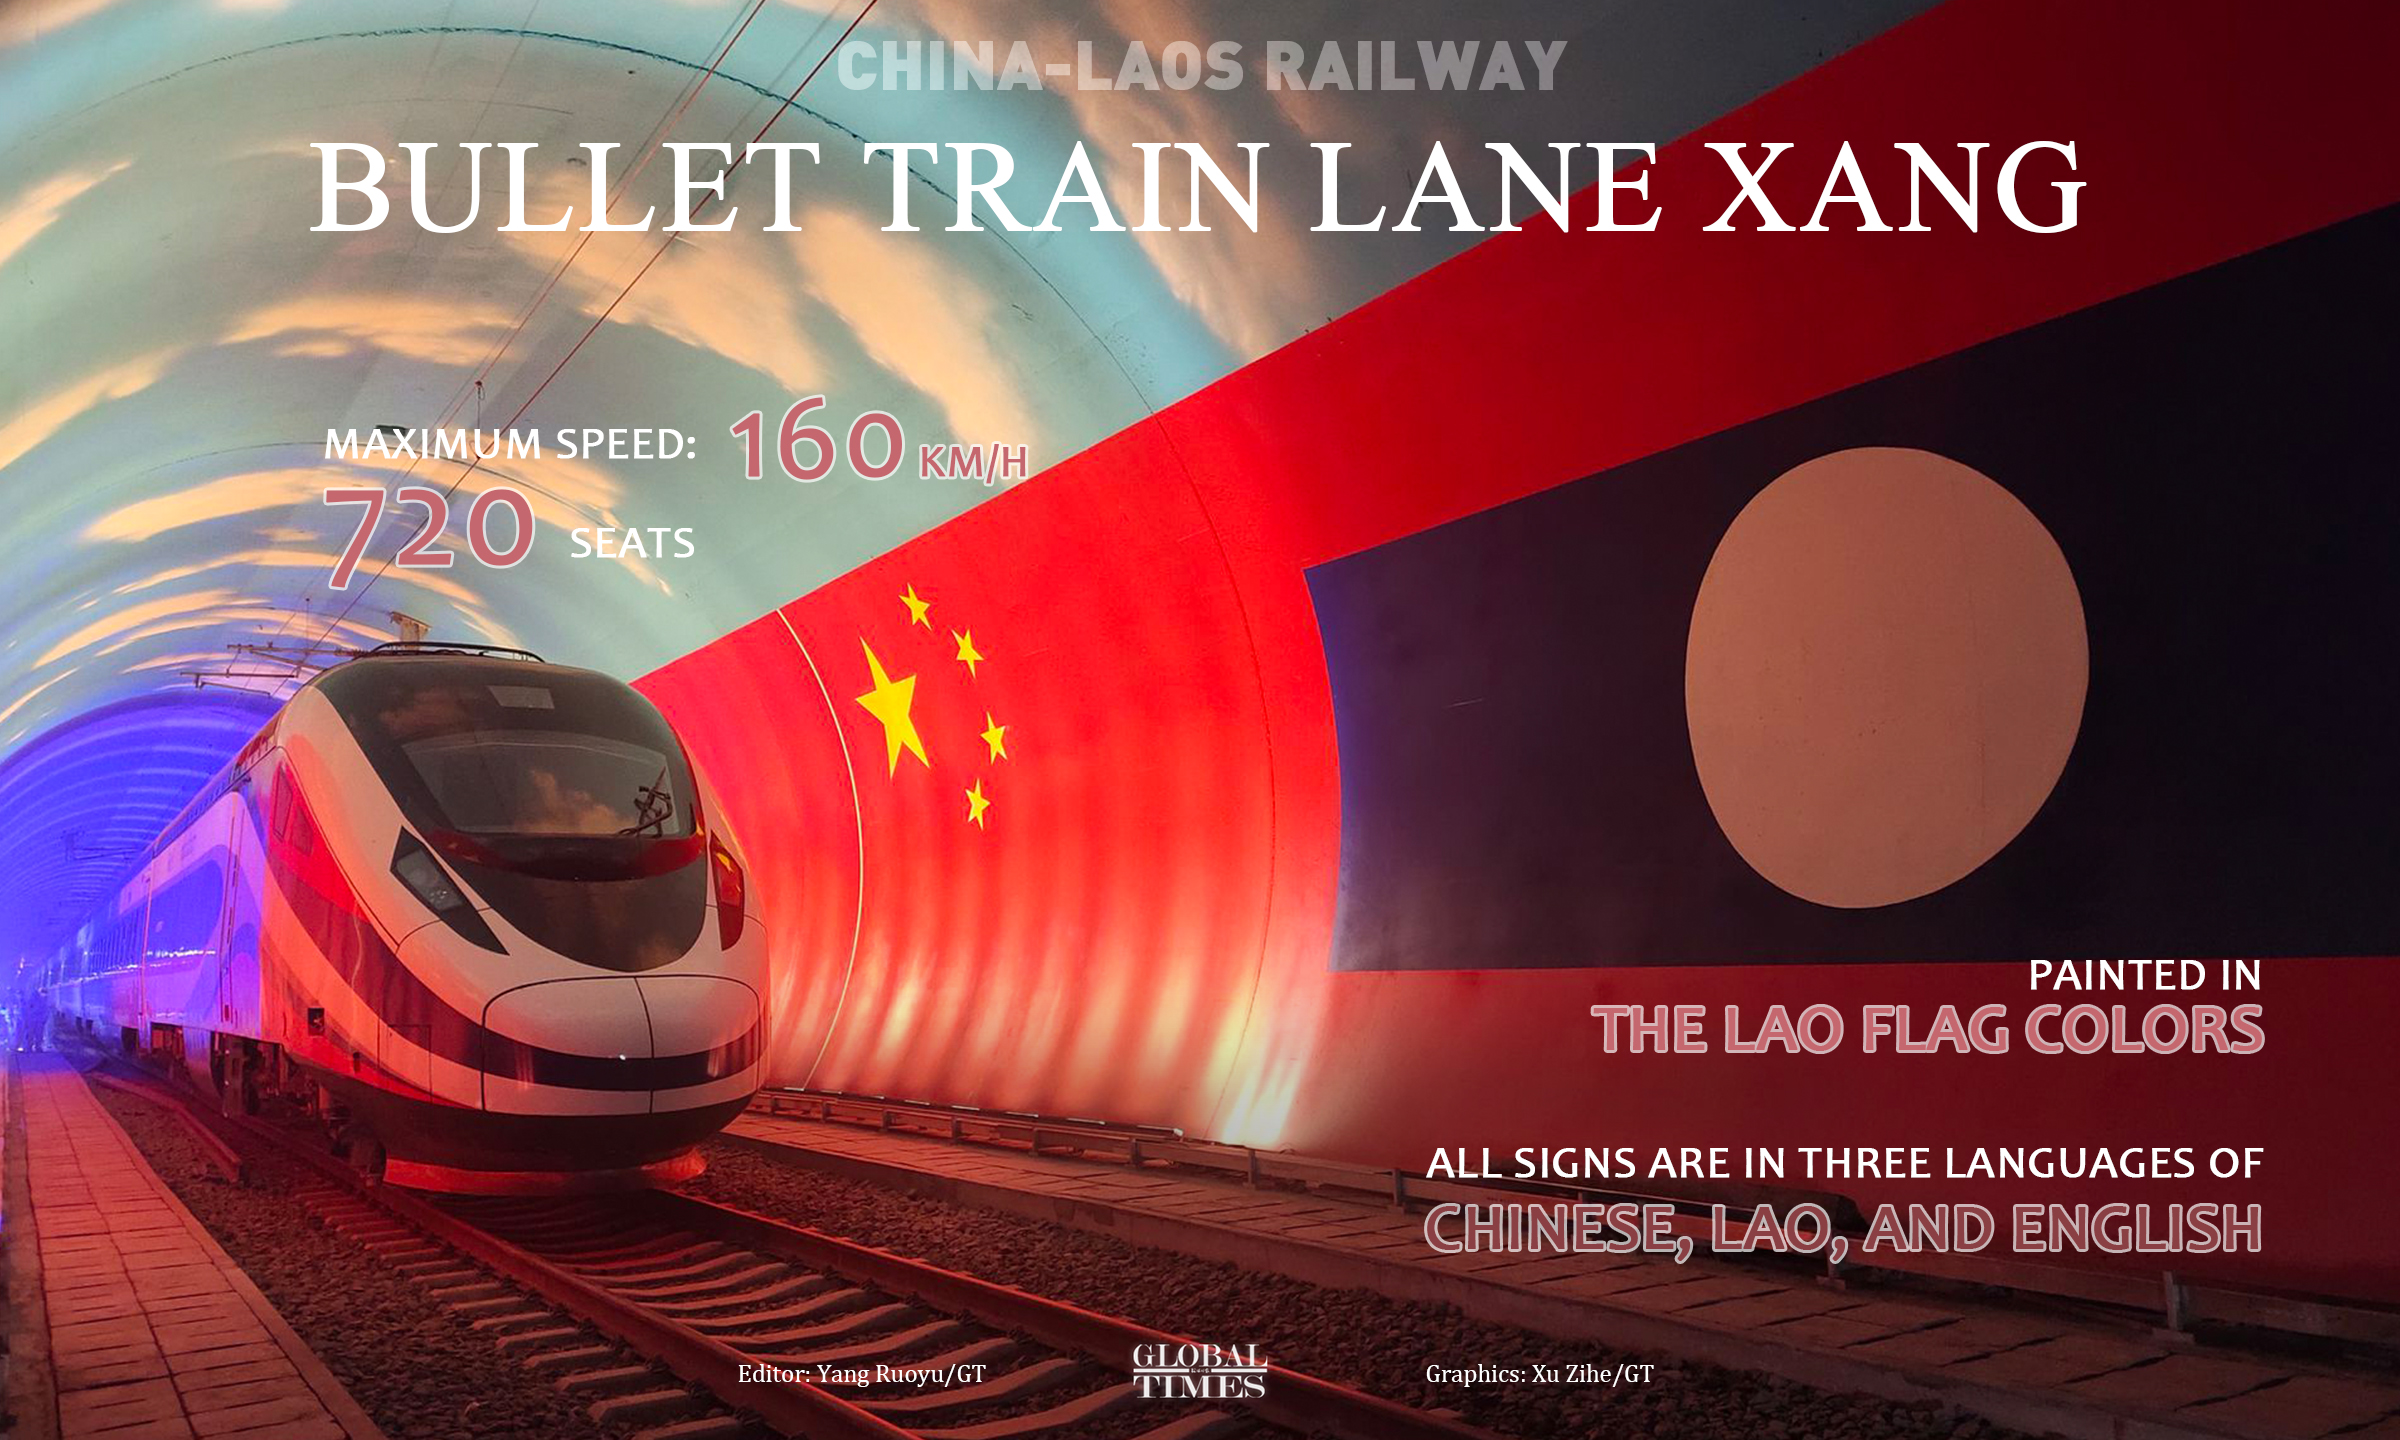 Architecture miracles in China-Laos Railway. Graphic: Xu Zihe/GT